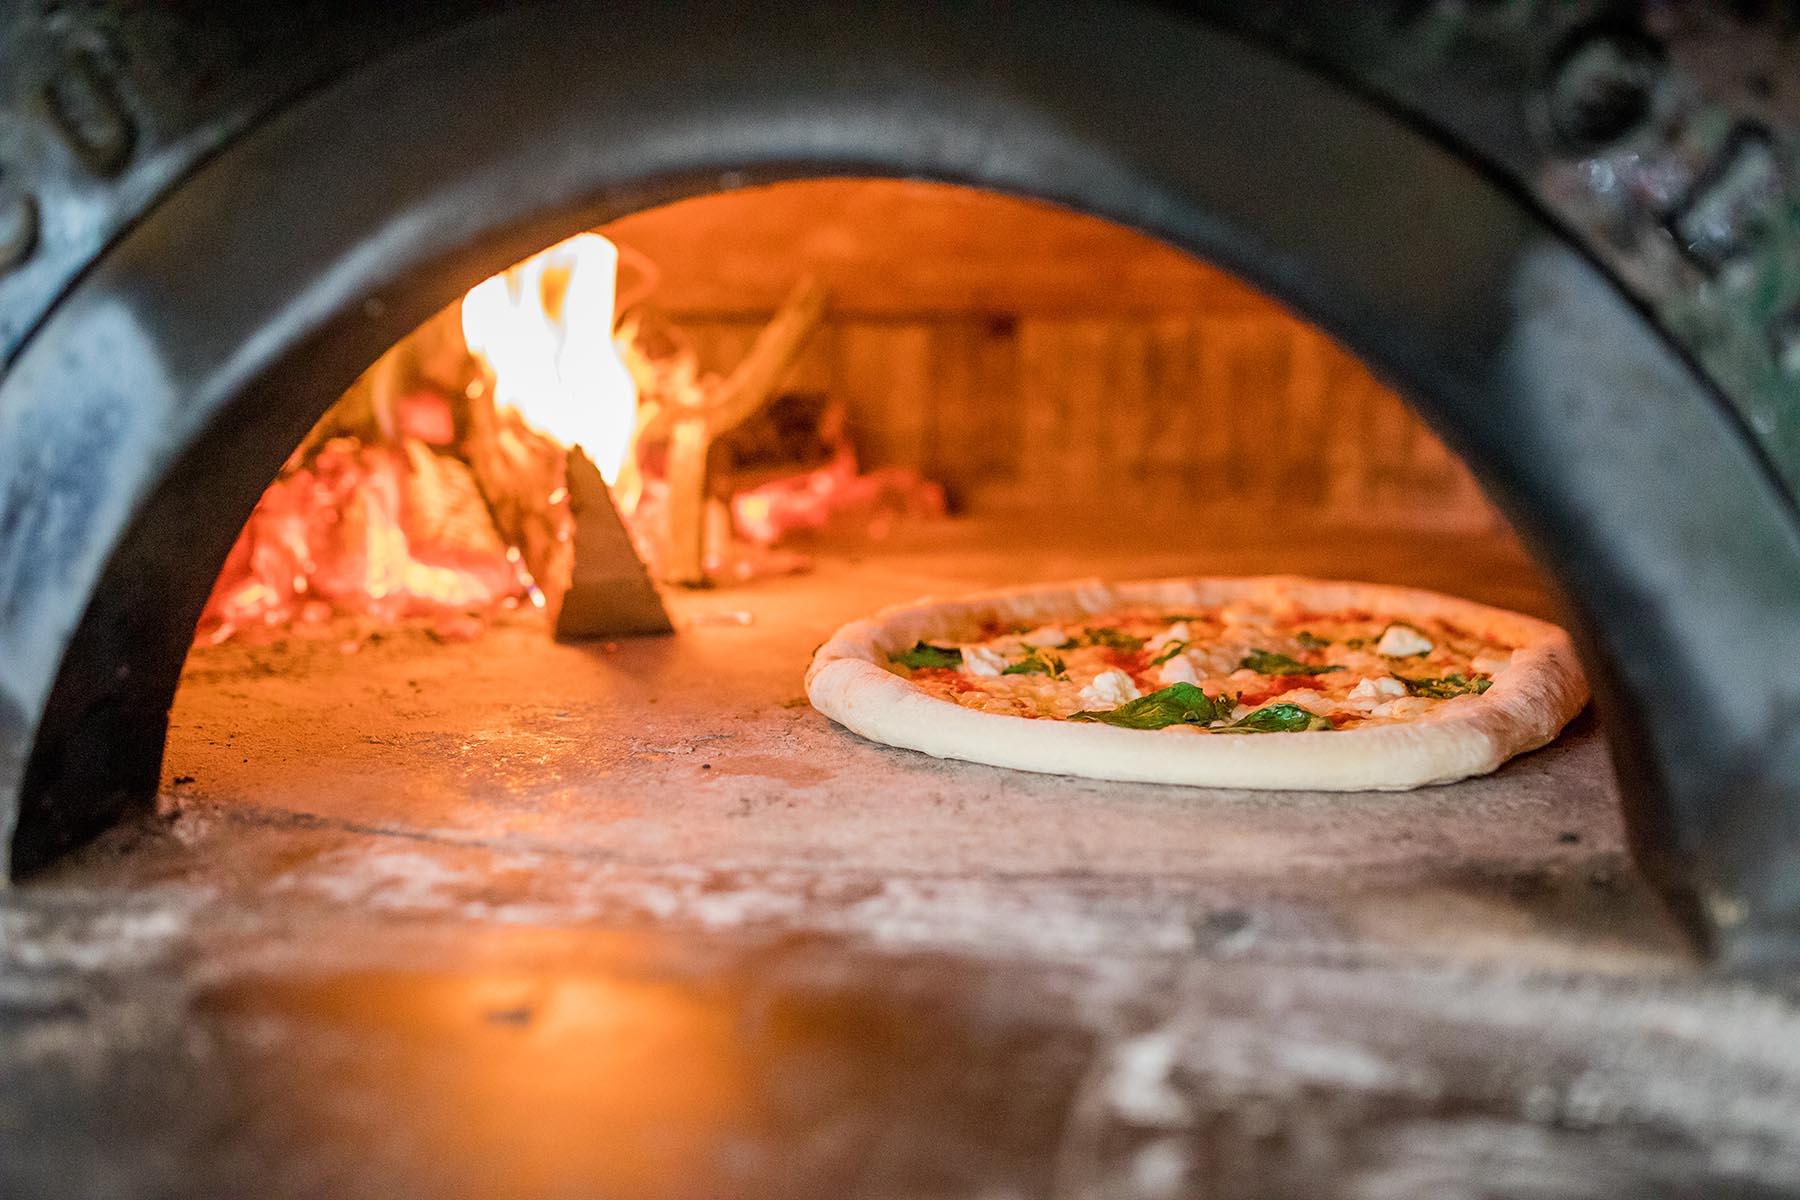 An unbaked pizza sitting in a wood-fired oven at Cugino Forno.